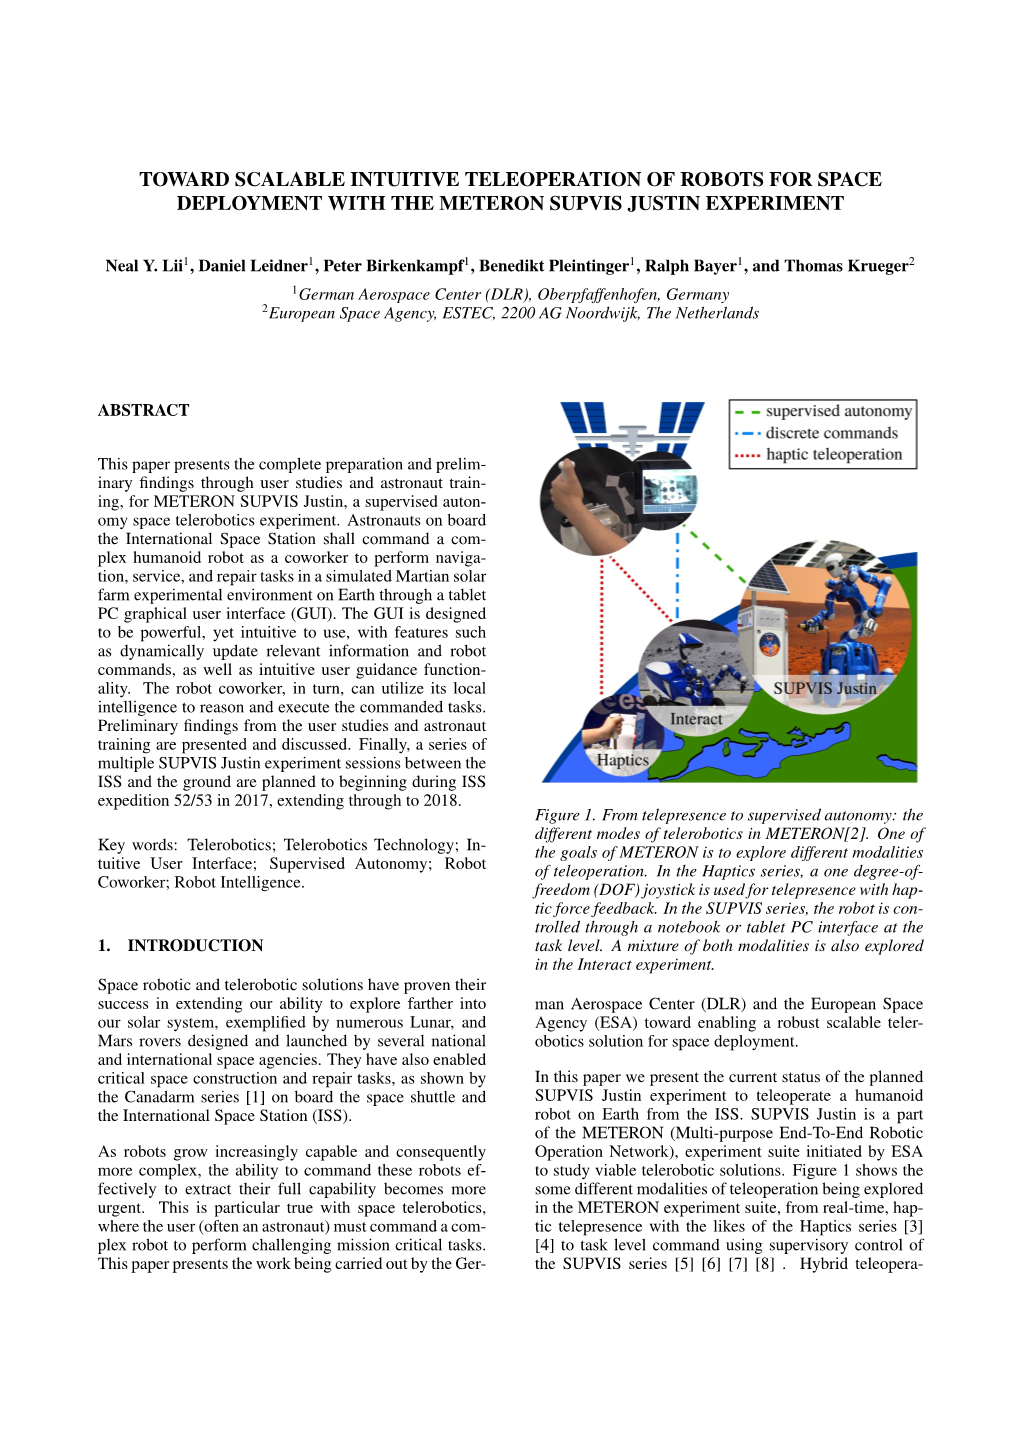 Toward Scalable Intuitive Teleoperation of Robots for Space Deployment with the Meteron Supvis Justin Experiment